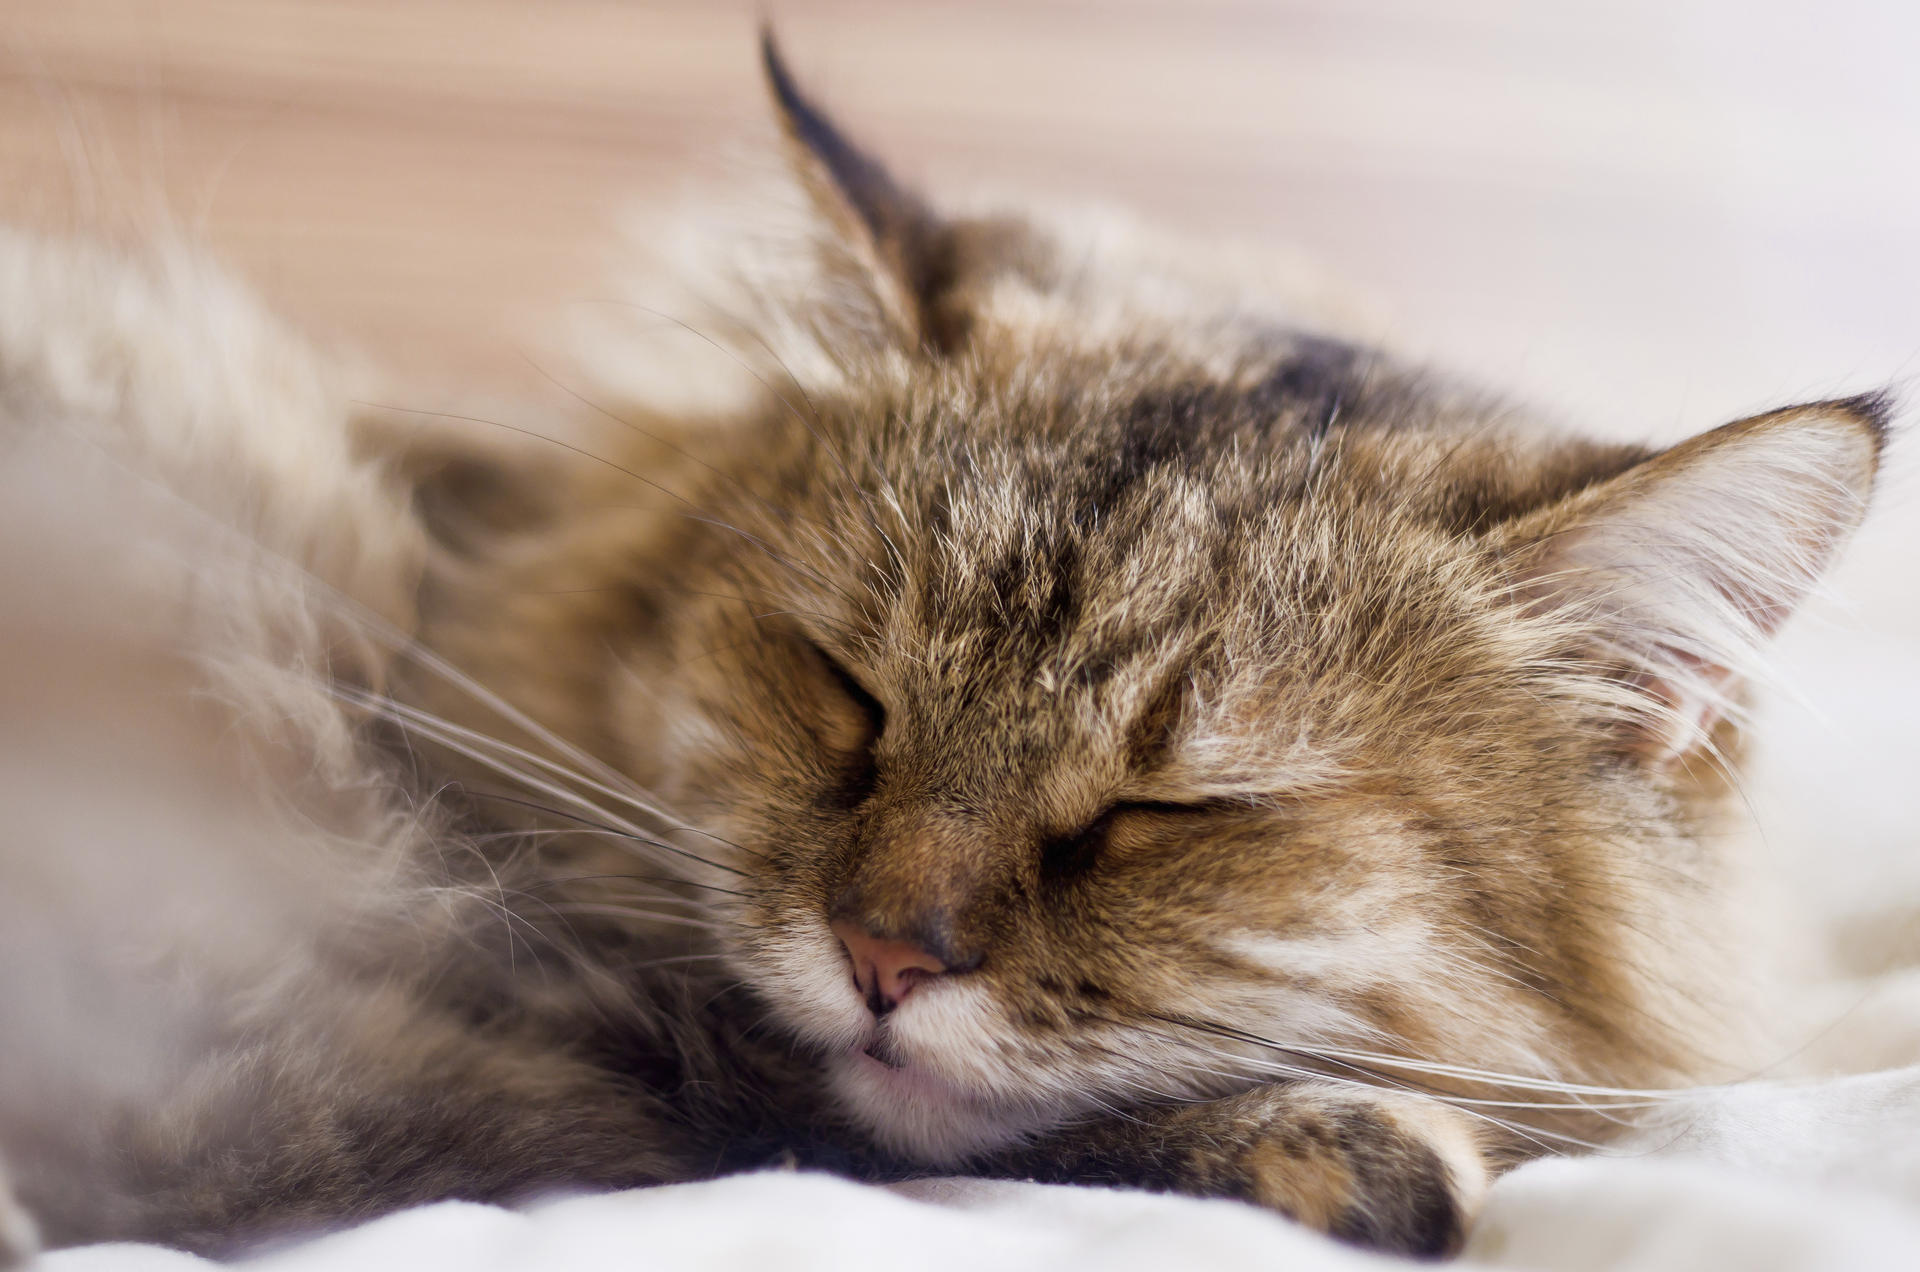 Tiredness and loss of appetite could indicate illness in cats. Photo: Thinkstock